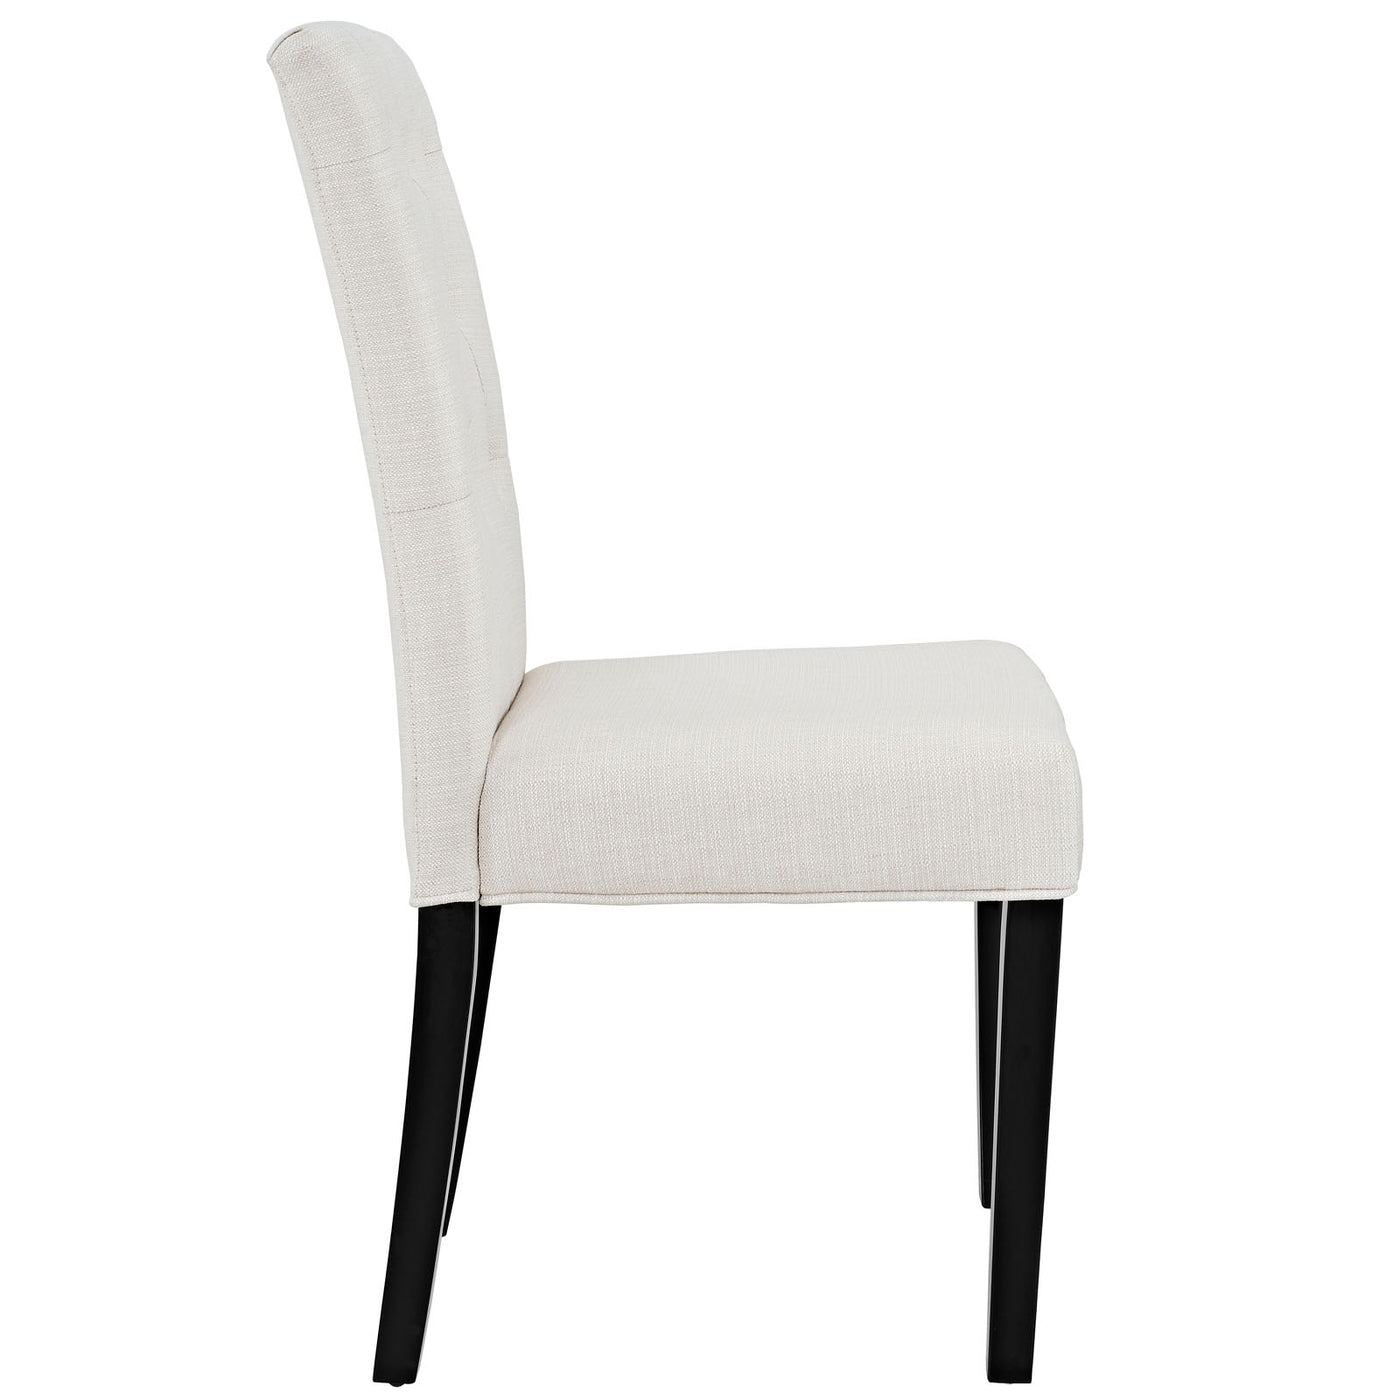 Confer Dining Fabric Side Chair